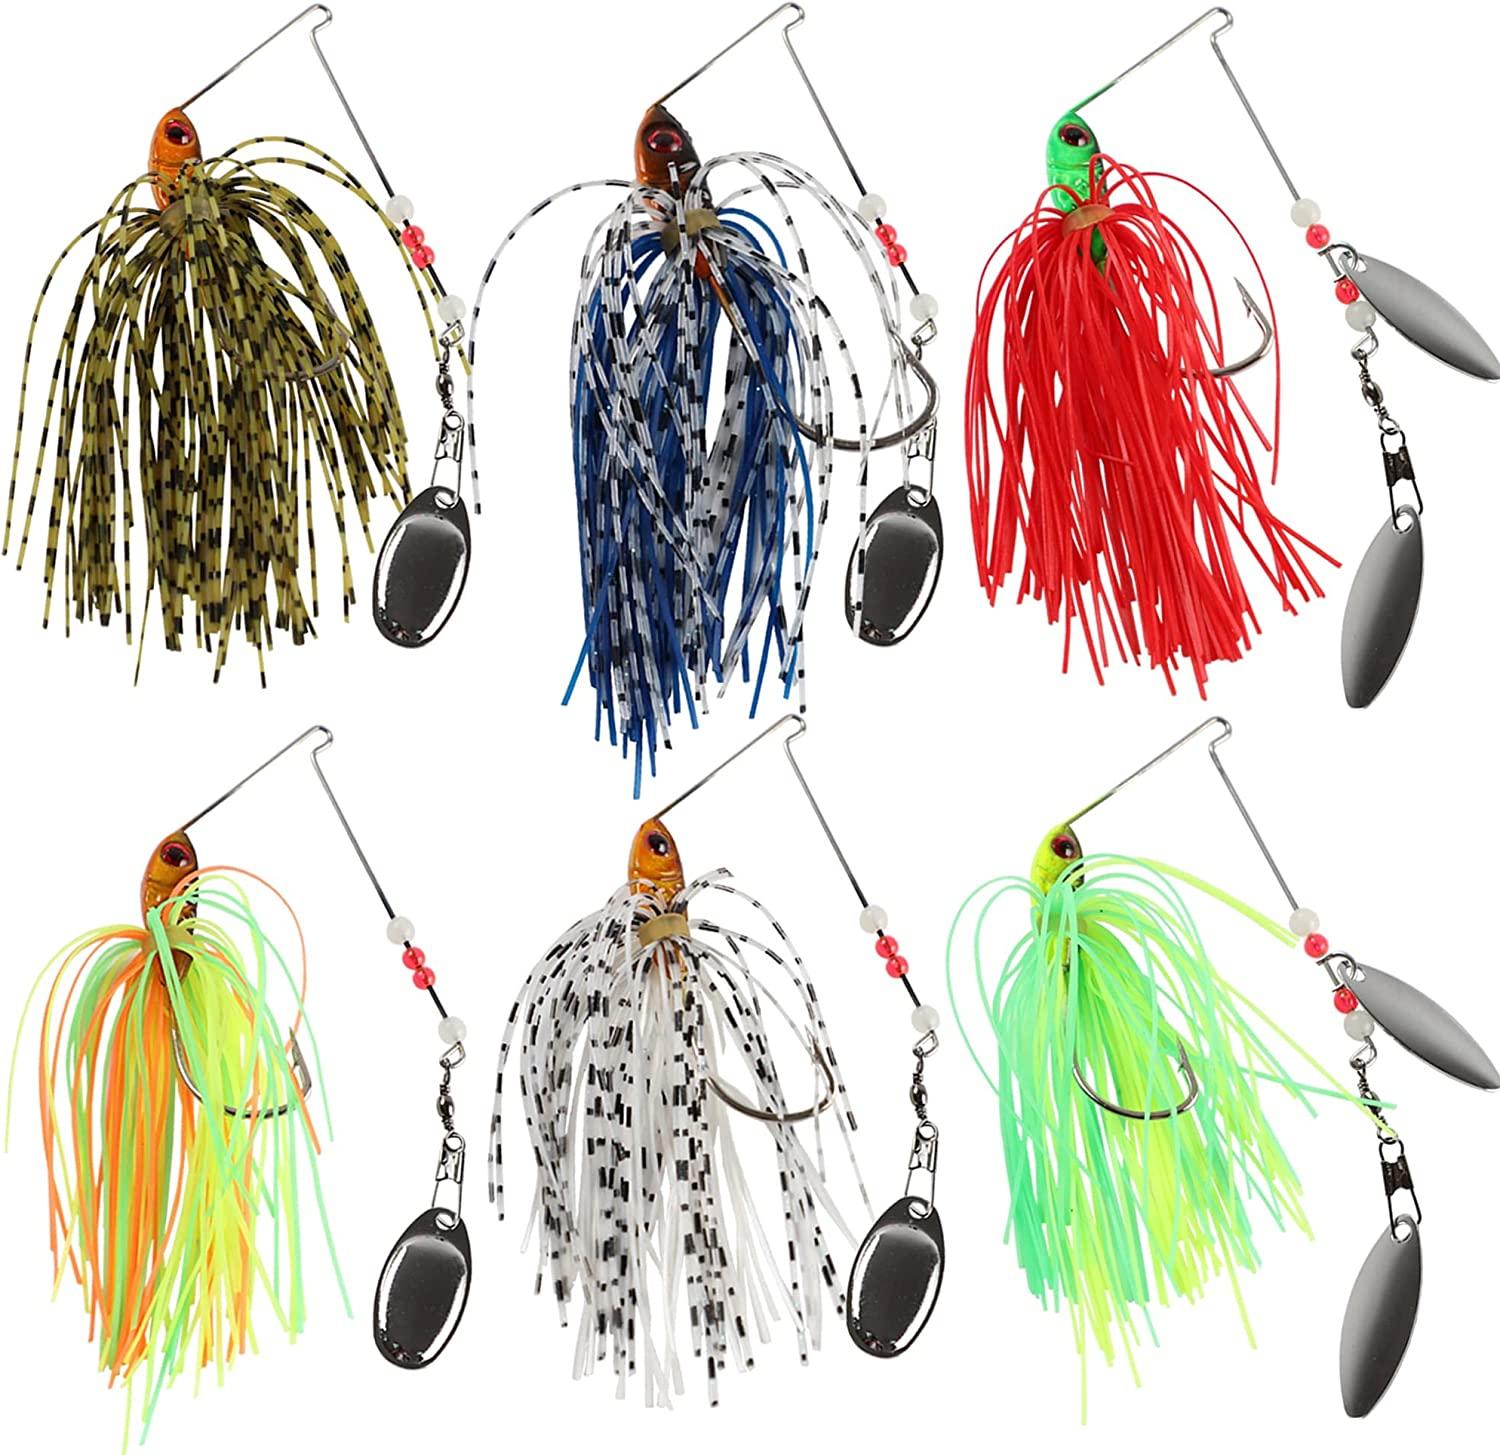 Bass Spinner Baits,6 Pcs Fishing Lures Spinner Baits,Spinner Baits for Bass  Fishing,Trout Salmon Hard Metal Spinnerbaits by Free Fisher